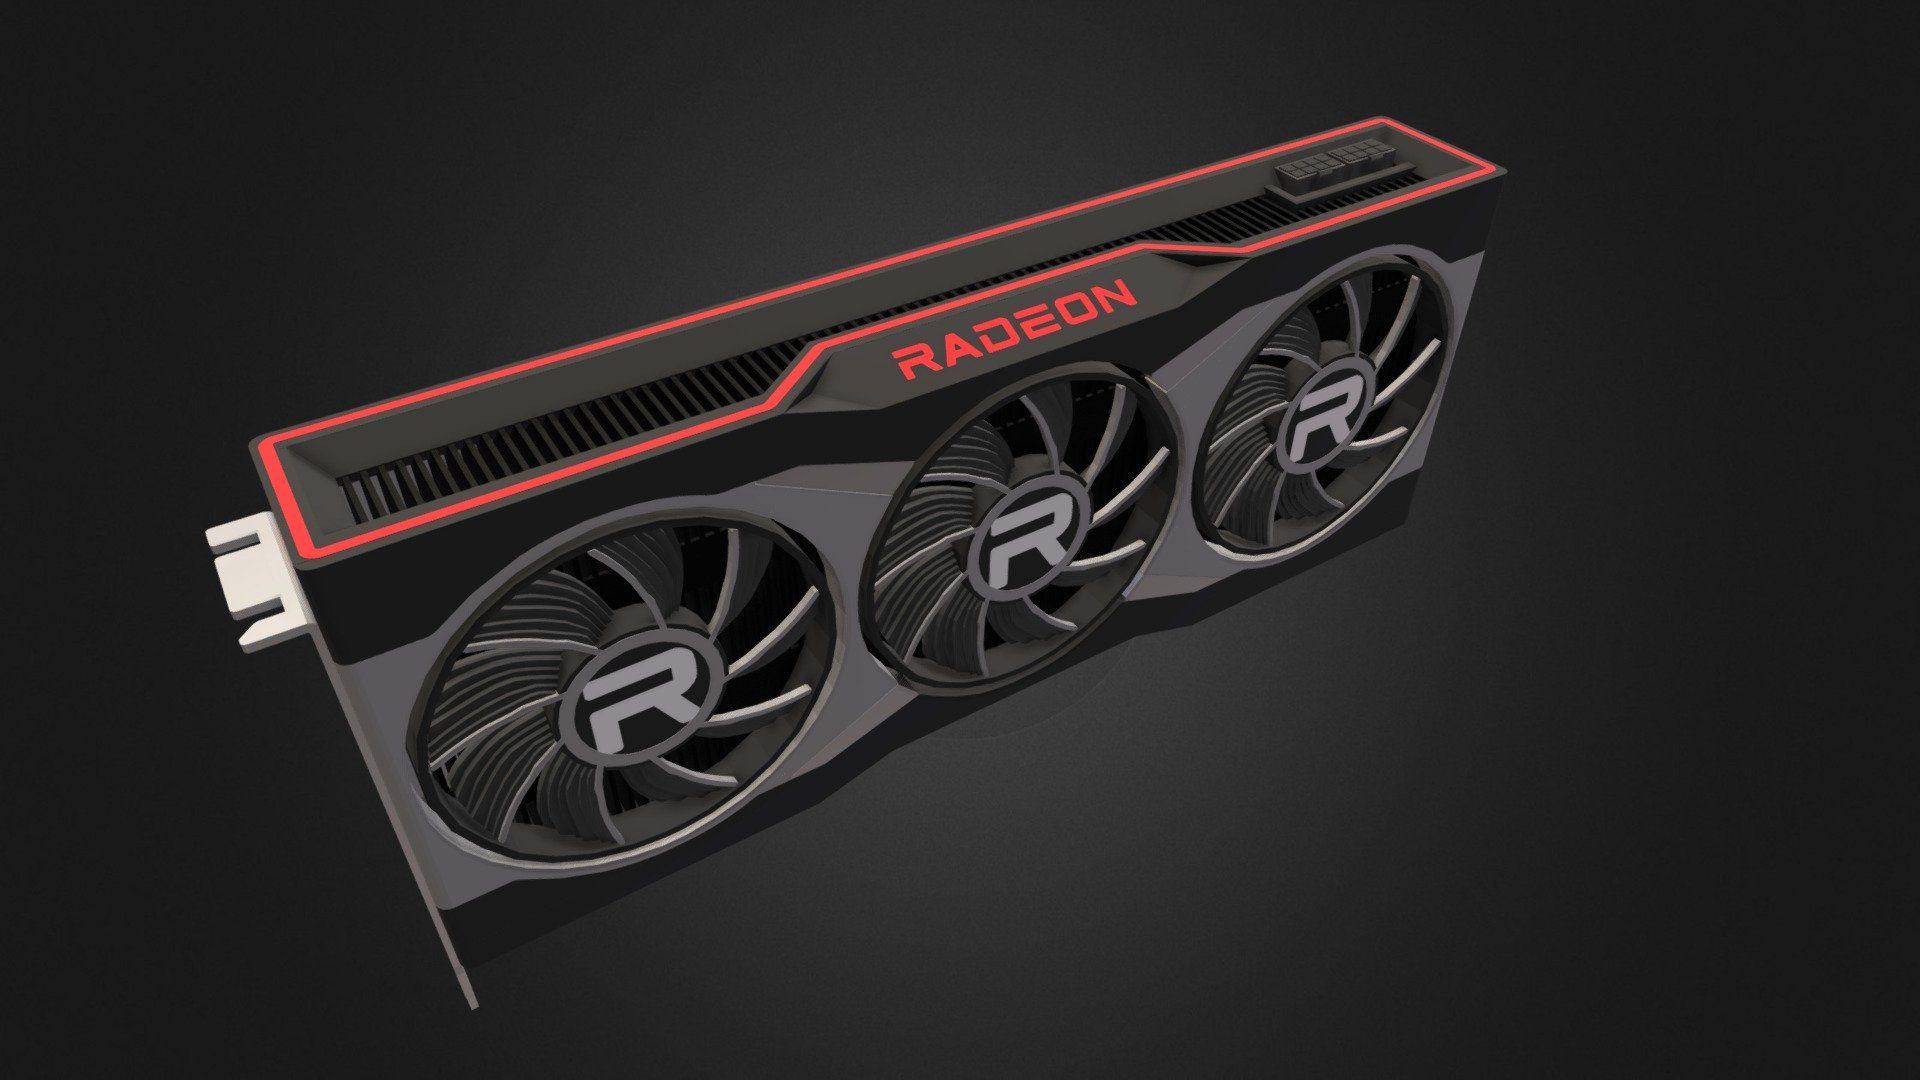 The AMD Radeon RX 6900XT GPU | Blockbench Model



By meu9MM98
made on Blockbench &amp; Rendered in Blender 


NOTE: DM me for .bbmodel (blockbench file)

The Radeon RX 6000 series is a series of graphics processing units (GPU) developed by AMD, based on their RDNA 2 architecture. It was announced on October 28, 2020 and is the successor to the Radeon RX 5000 series. The lineup consists of the RX 6600, RX 6600 XT, RX 6700 XT, RX 6800, RX 6800 XT and RX 6900 XT for desktop computers, and the RX 6600M, RX 6700M, and RX 6800M for laptops.

The lineup is designed to compete with Nvidia's GeForce 30 series of cards. These GPUs are also the first generation of AMD GPUs that support hardware accelerated real-time ray tracing.



My Socials



My Discord Server | https://discord.gg/G8AvAkvcsr
My Instagram | https://www.instagram.com/meu9mm98/
My Twitch | https://www.twitch.tv/meu9mm98
 - AMD Radeon RX 6900XT | Low Poly - 3D model by M E U (@meu9MM98) 3d model